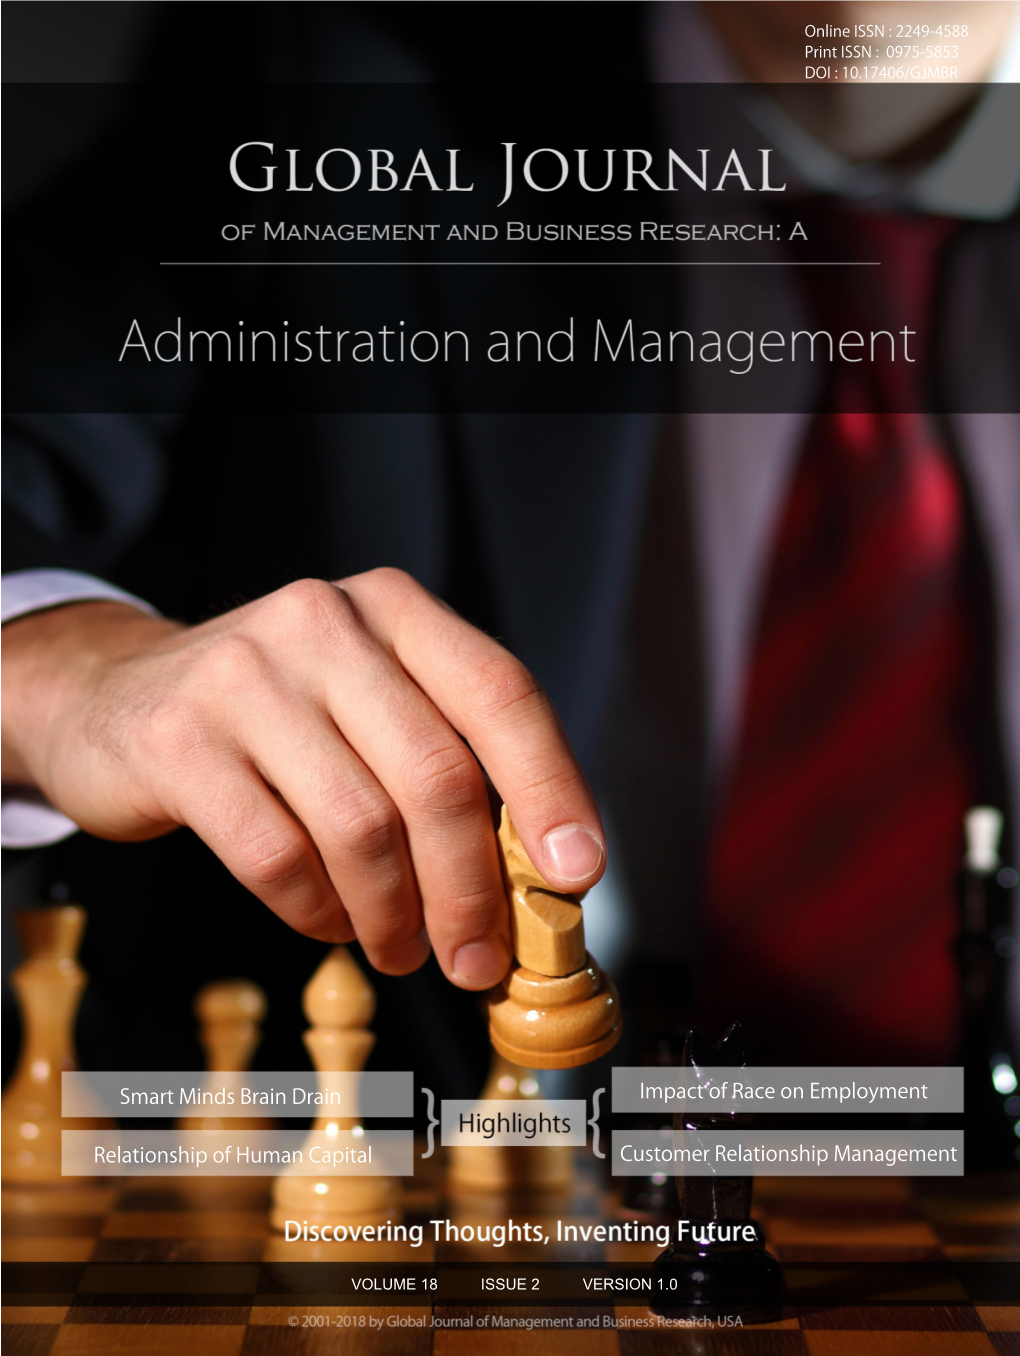 Global Journal of Management and Business Research: a Administration and Management